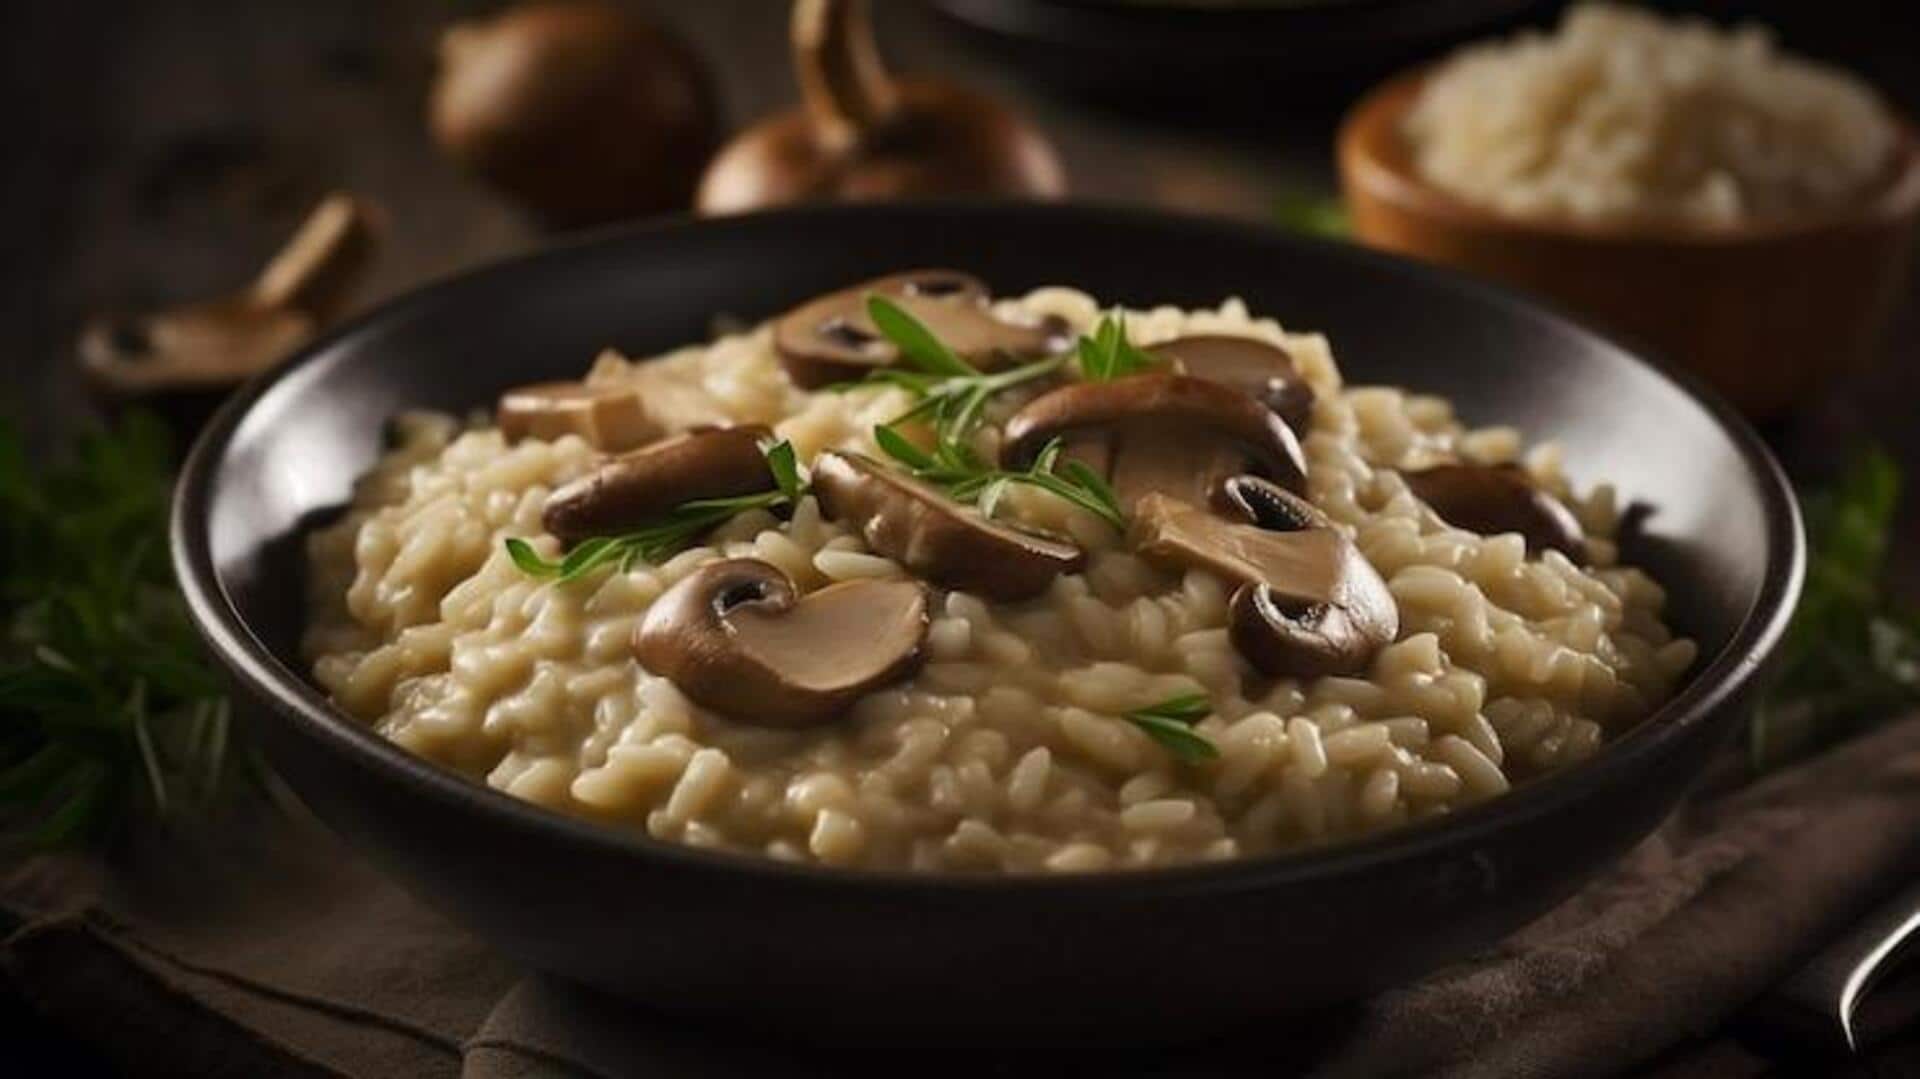 This shiitake mushroom risotto recipe will impress your guests